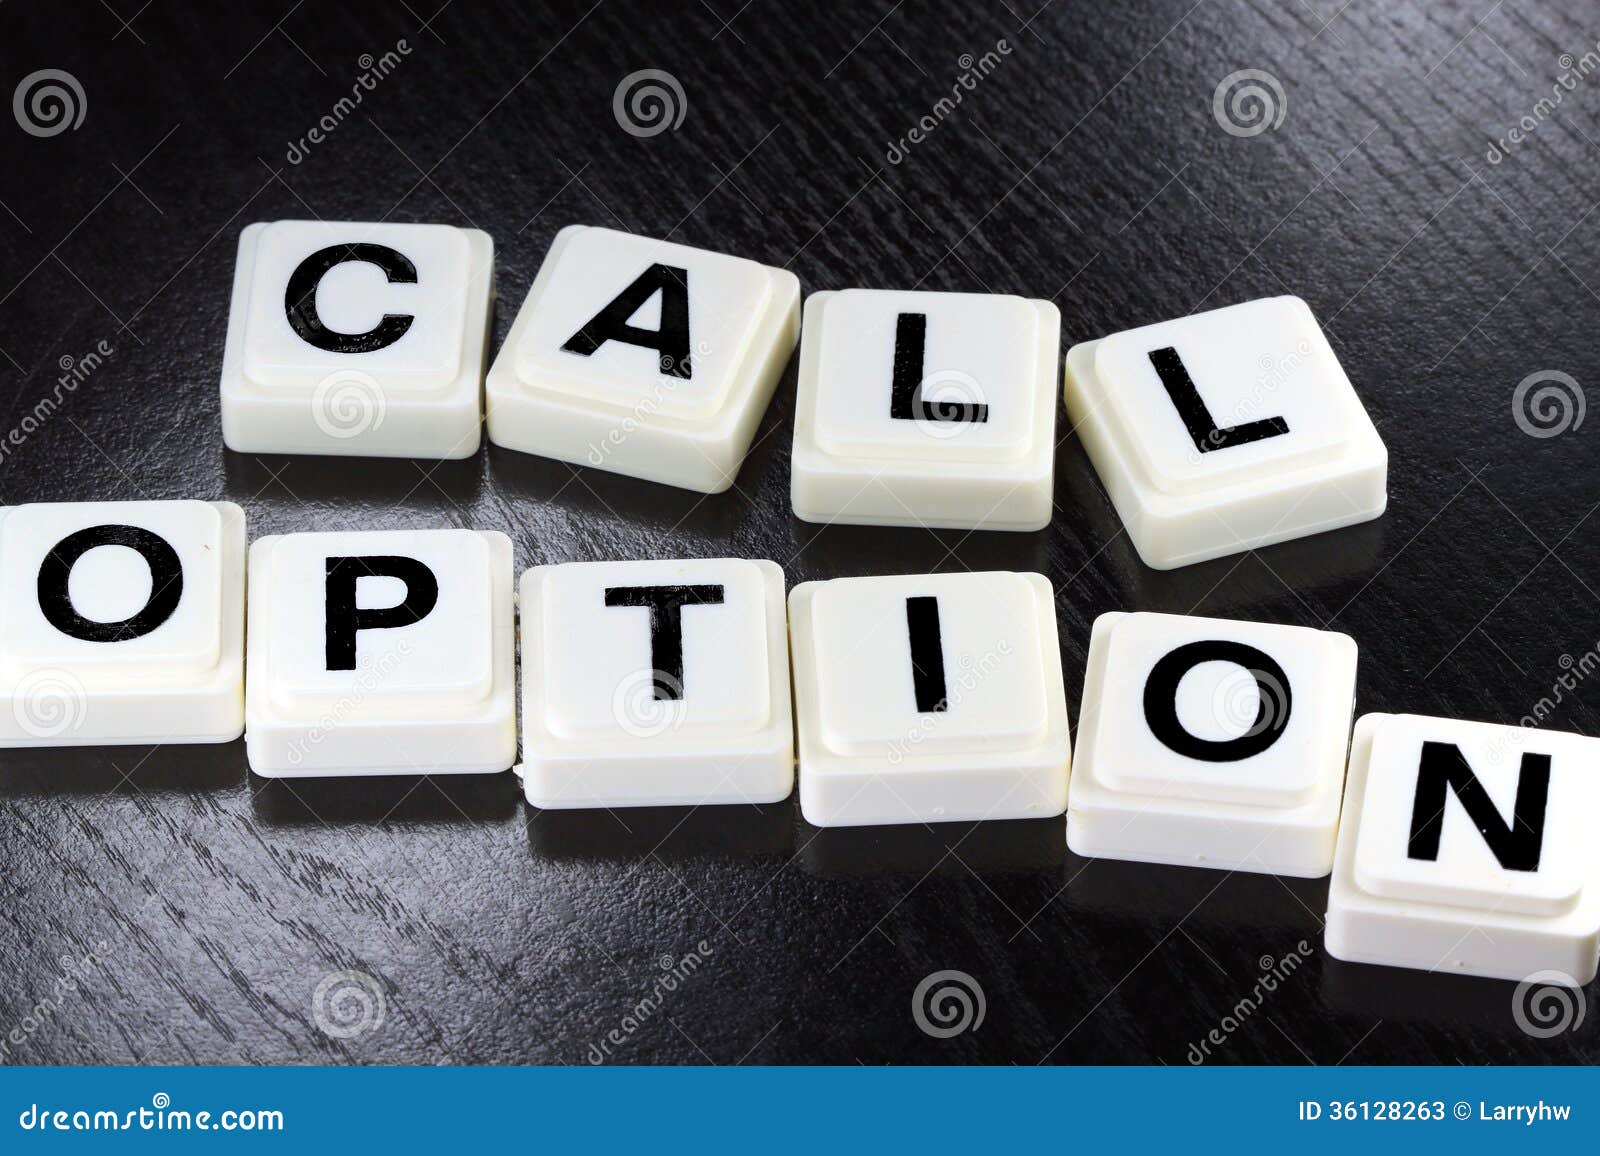 put and call strategy in call option graphic